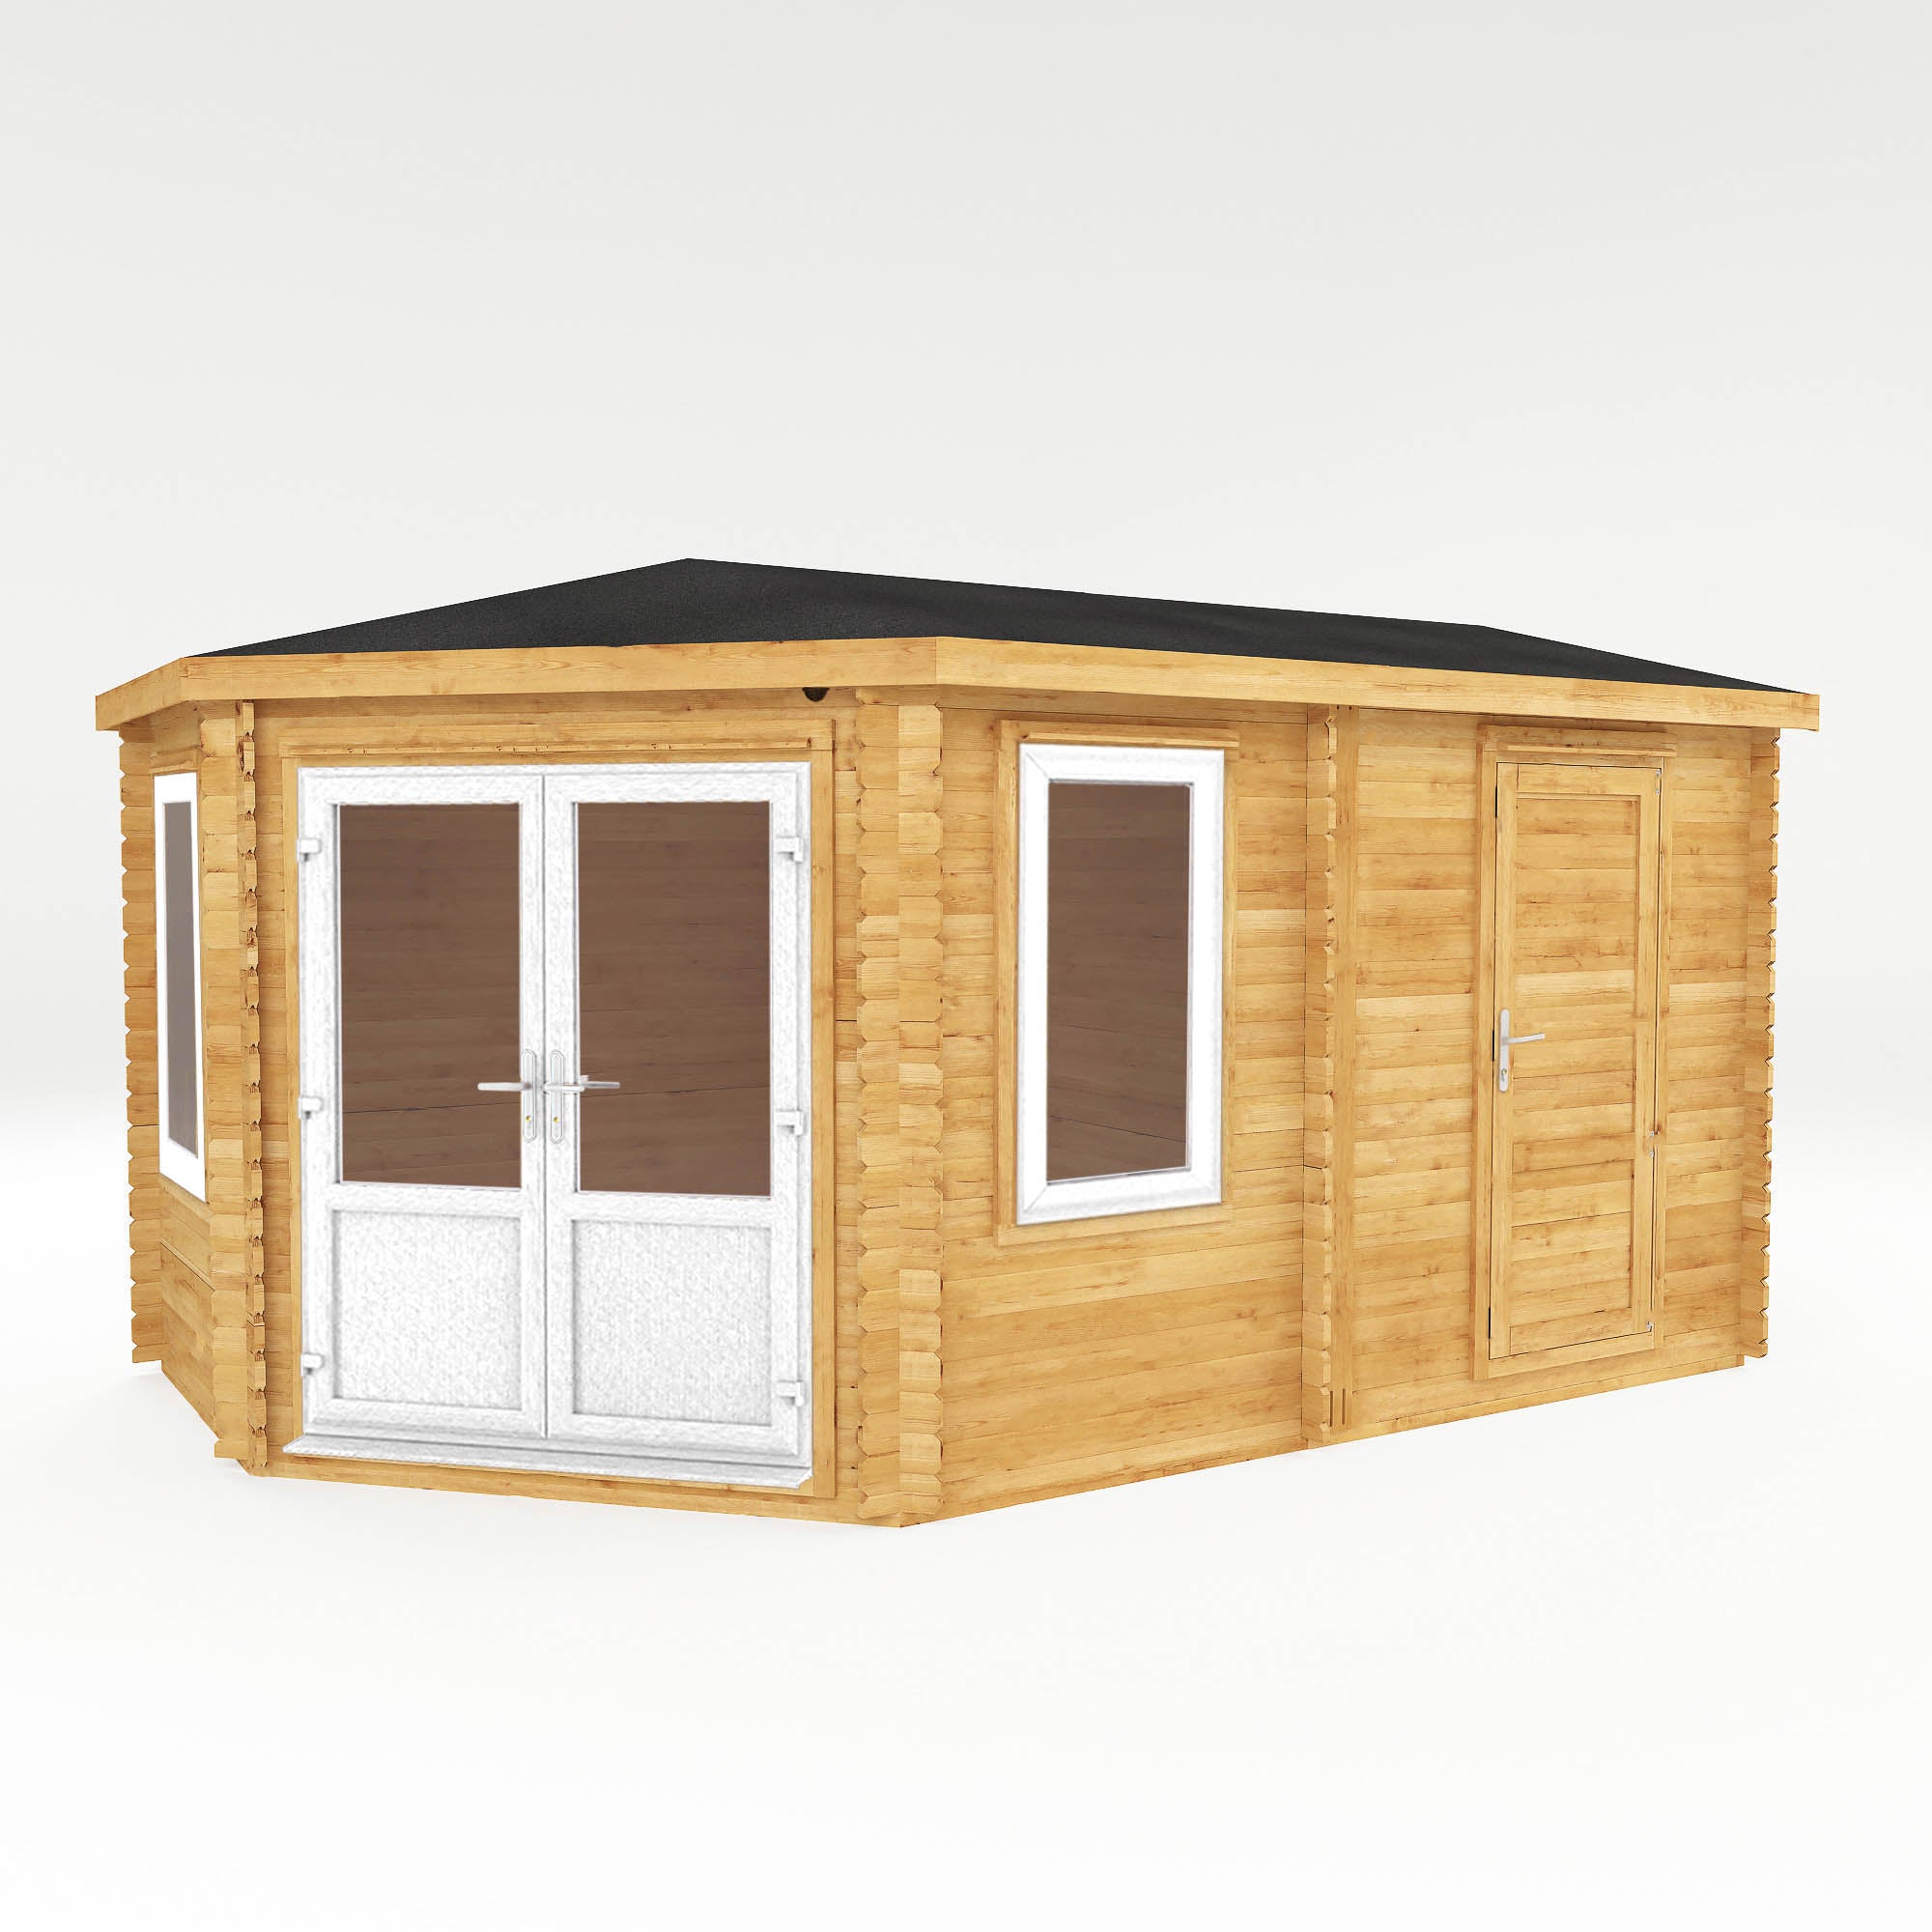 5m x 3m Corner Lodge Log Cabin With Side Shed - UPVC White